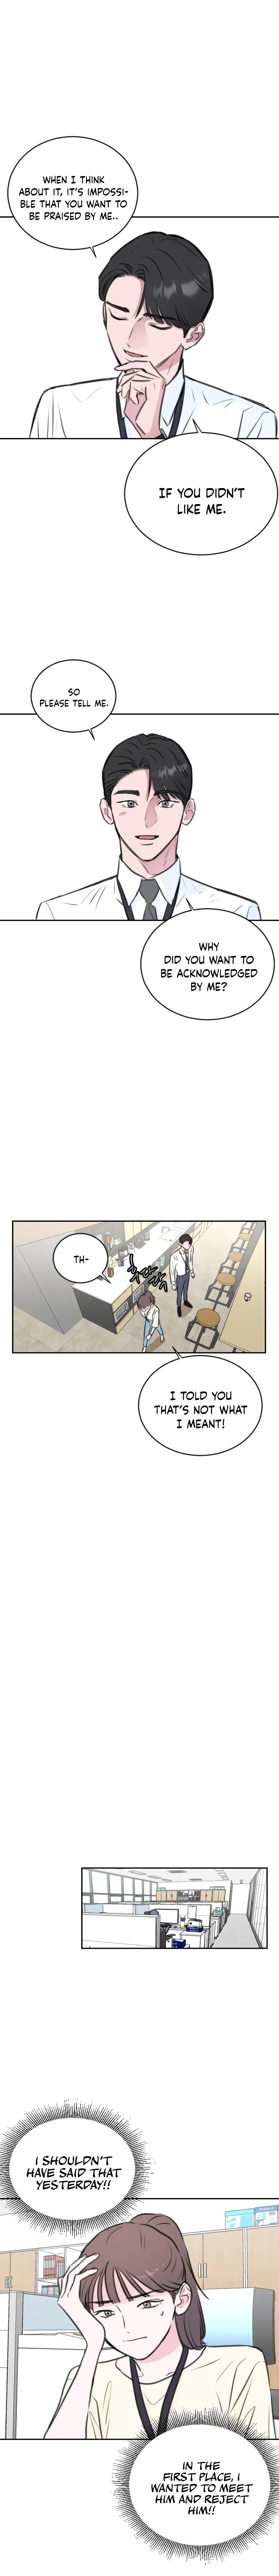 Office Marriage, After a Breakup chapter 13